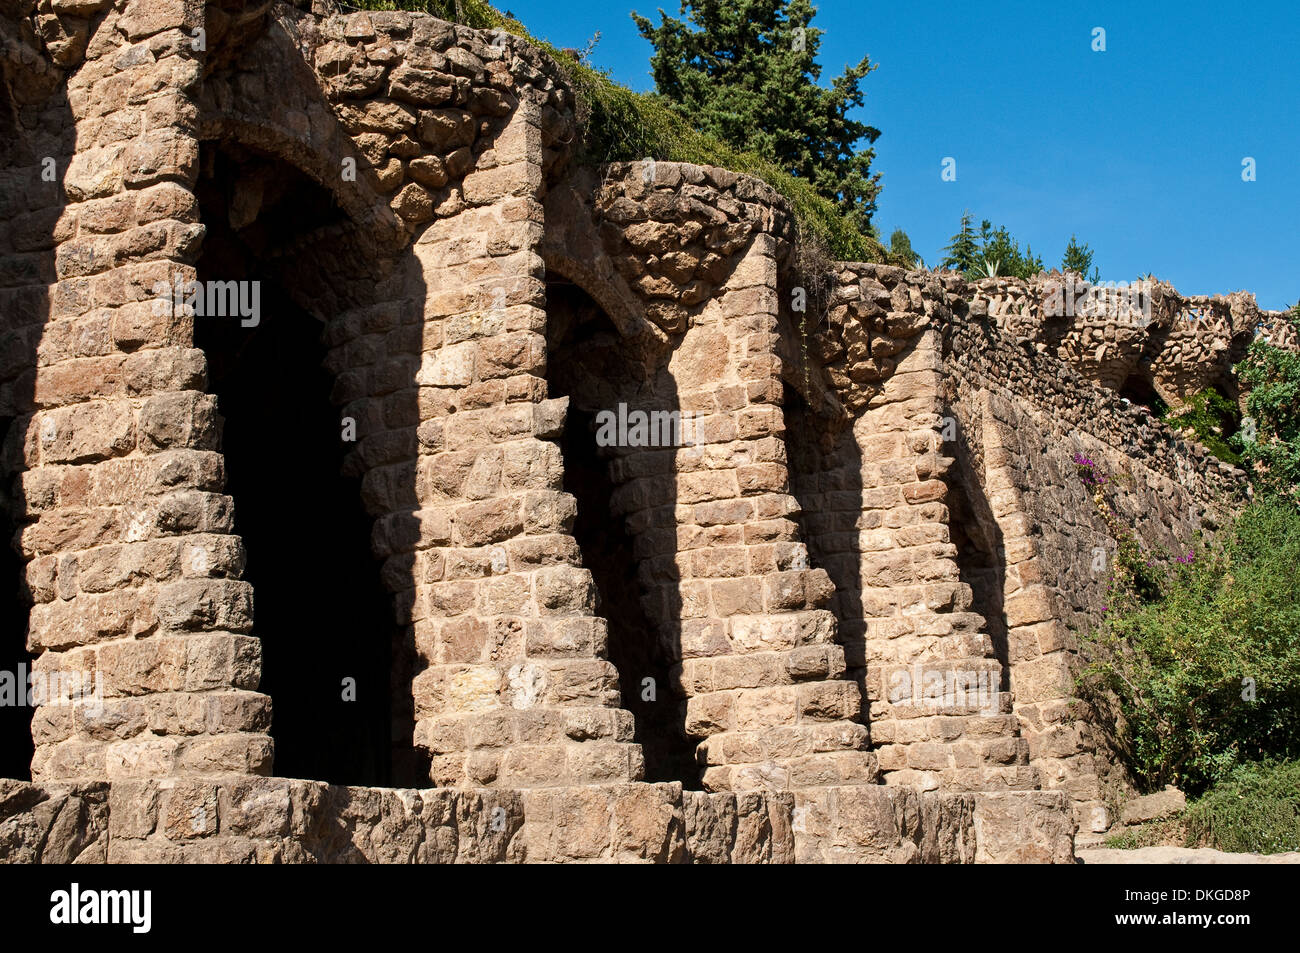 Bird nests in the terrace walls, Park Guell, Barcelona, Catalonia, Spain Stock Photo